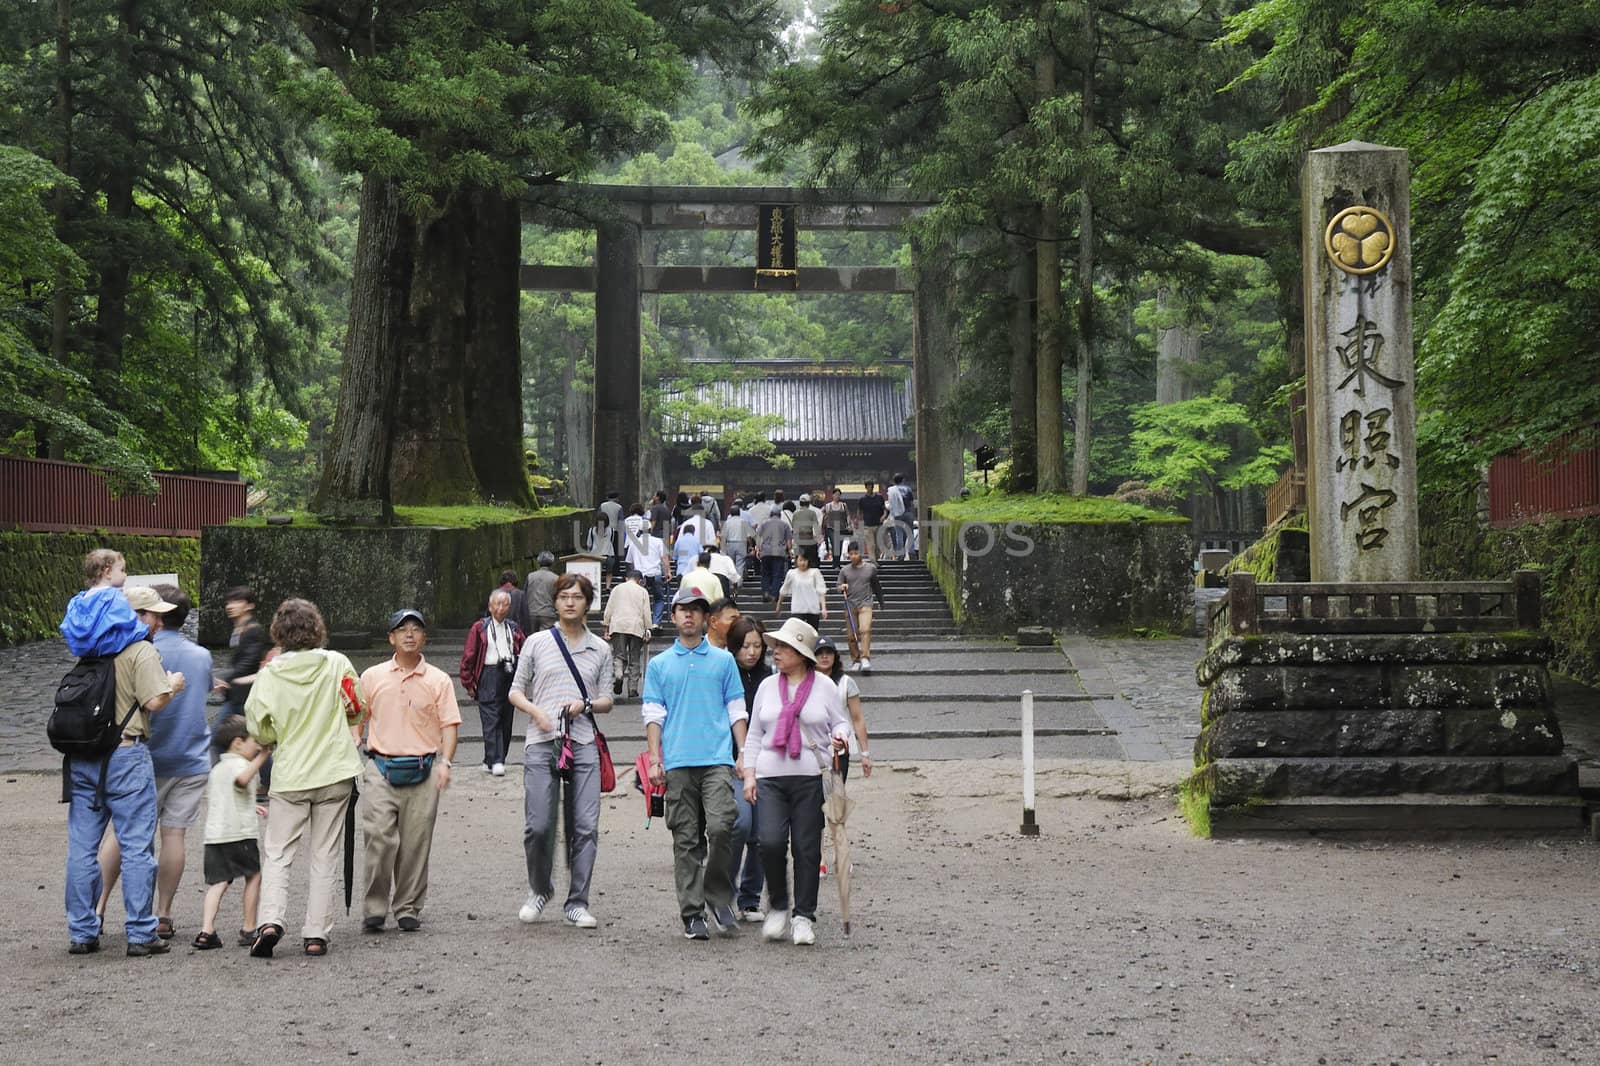 Nikko, Japan - June 22, 2008: Tourists walk at Toshogu shrine entrance by rainy summer time. Toshogu is  World Heritage site and contains five structures that are National Japanese Treasures. It is famous as a mausoleum site of Tokugawa Ieyasu, founder of the Tokugawa shogunate, which ruled Japan for over 250 years until 1868.